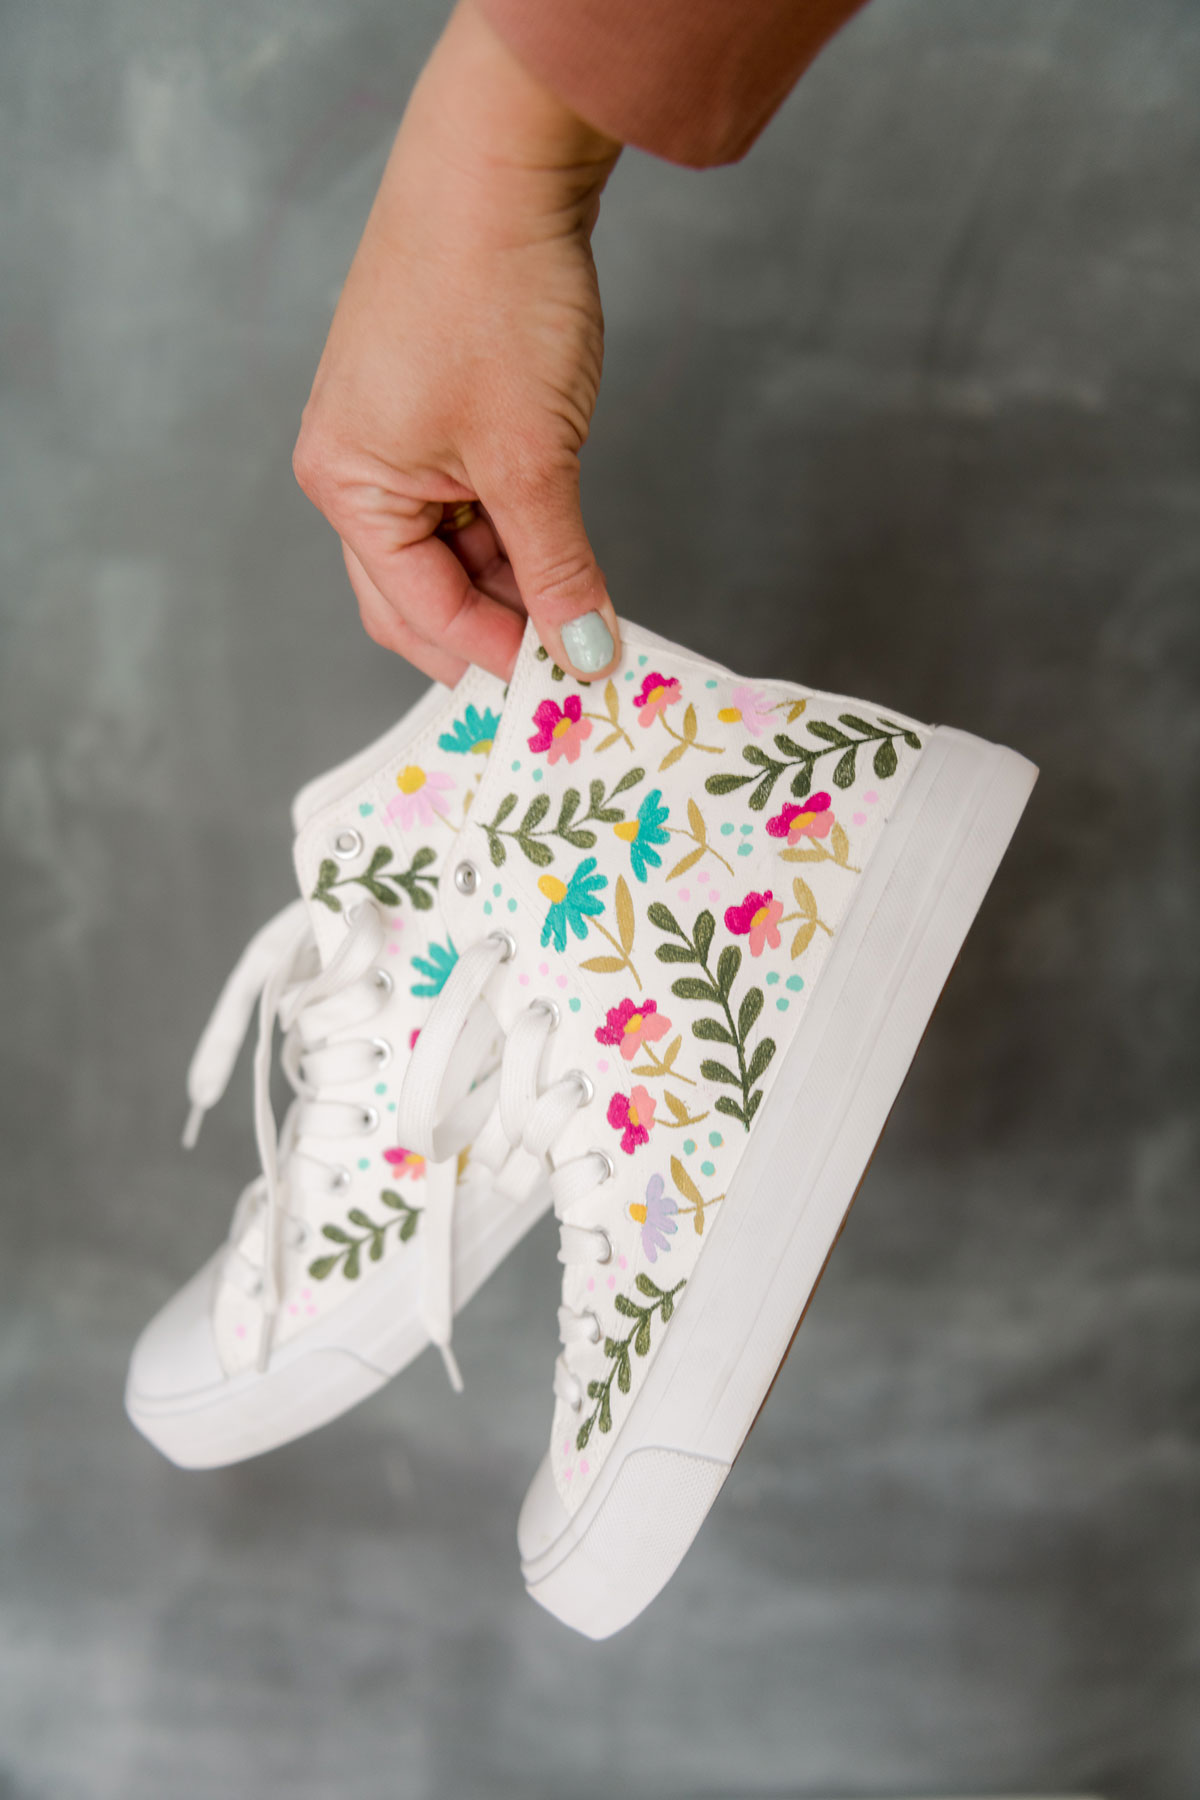 Floral painted shoes, Posca painted shoes, custom painted canvas shoes, floral painted shoes, painted converse shoes, floral painted converse